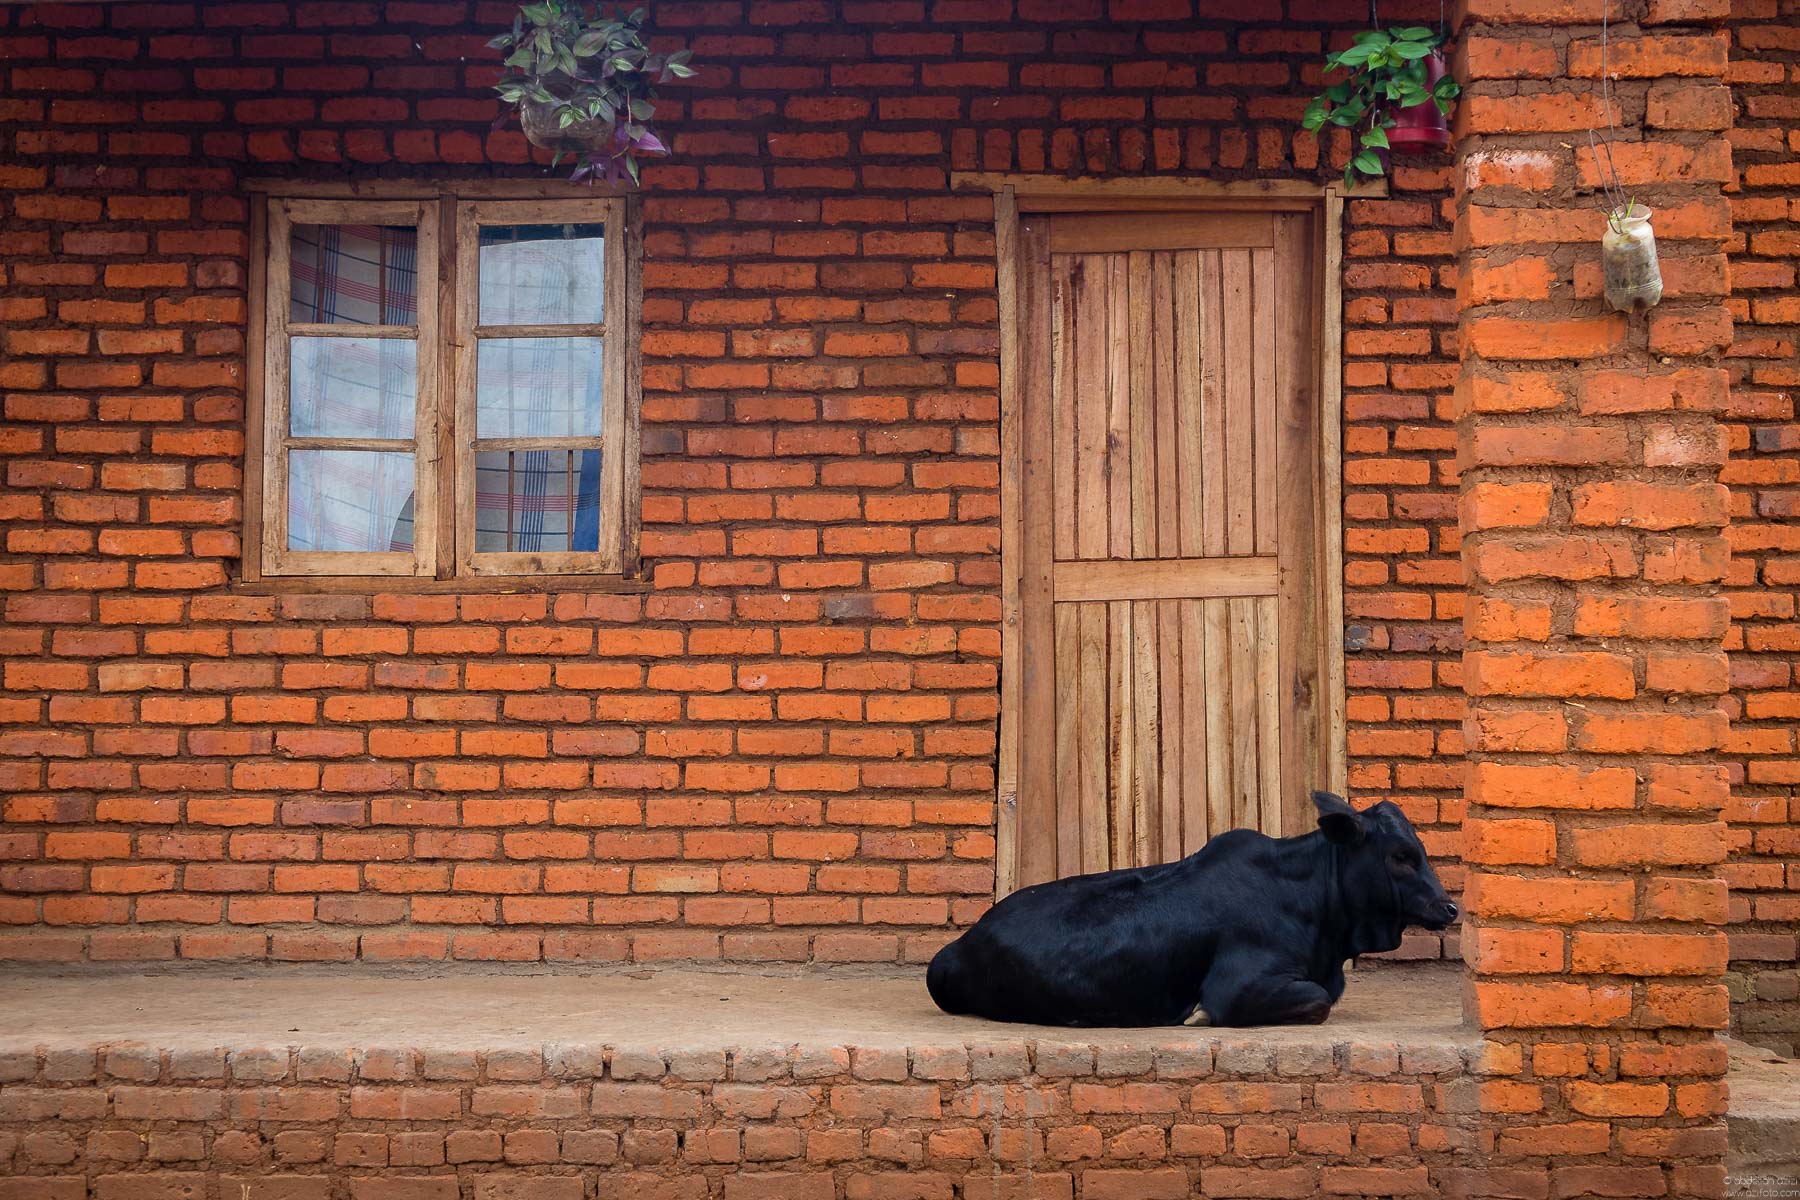 Cow in font of a house - malawi